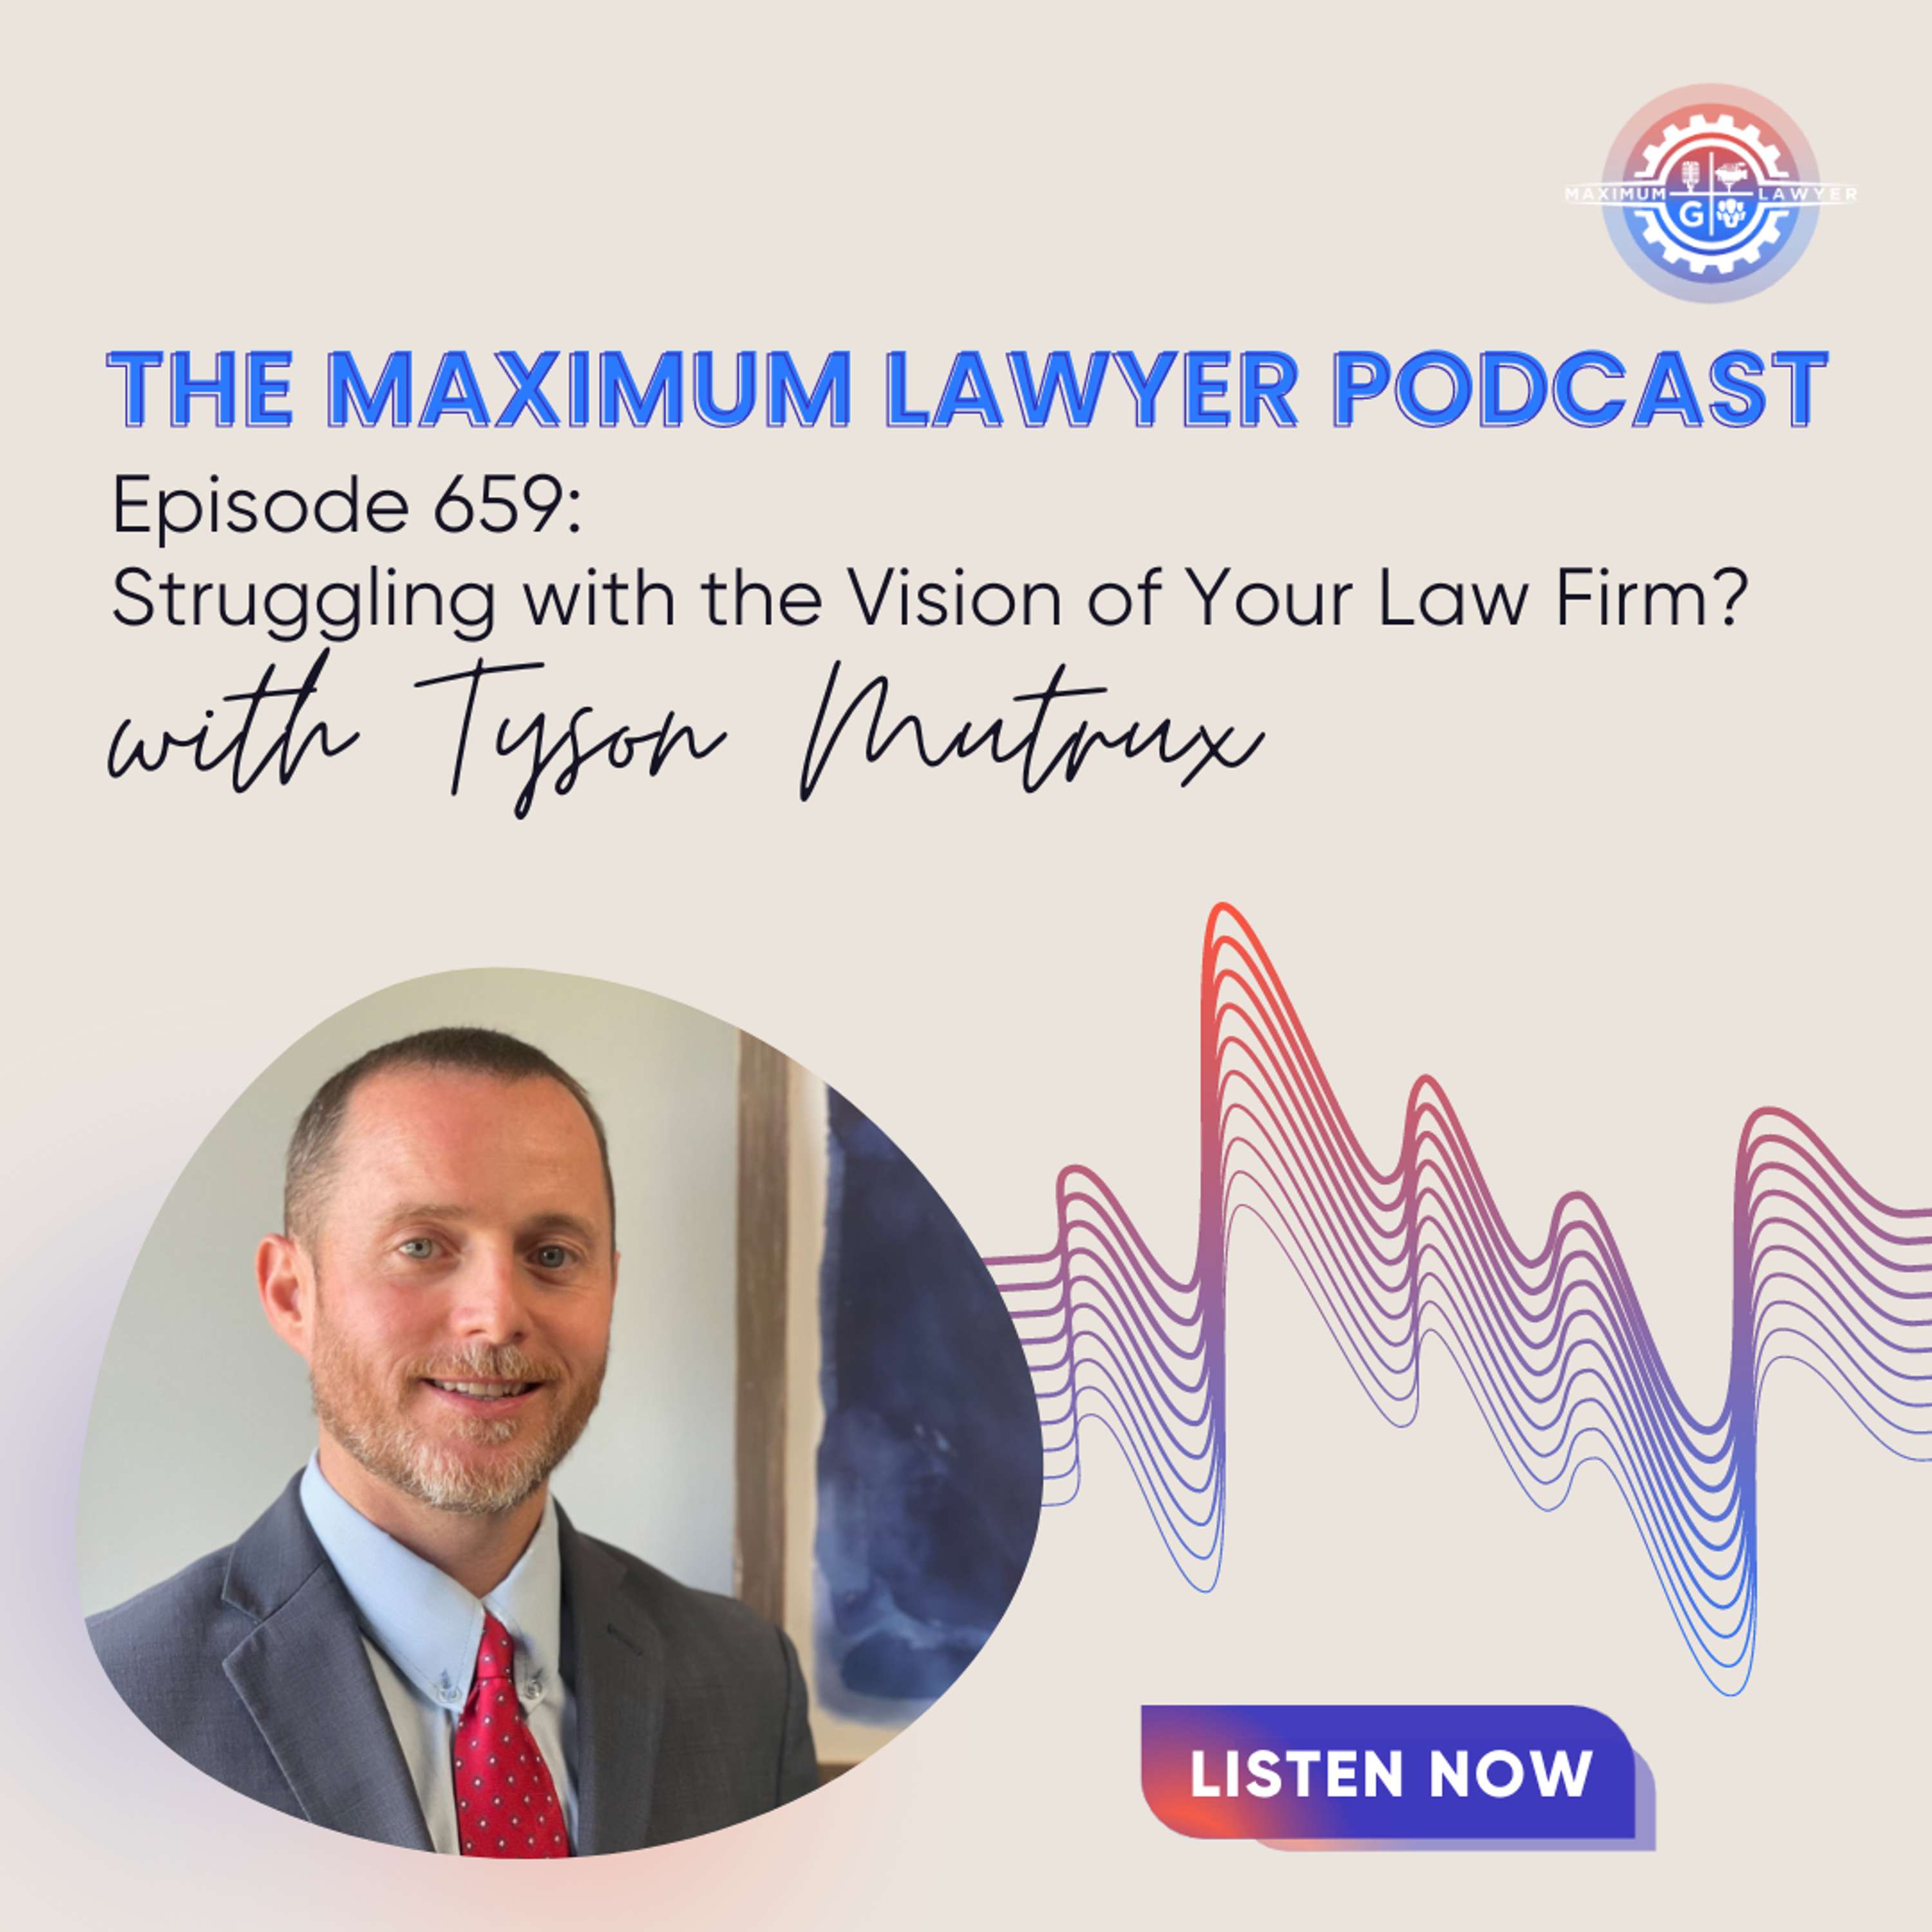 Struggling with the Vision of Your Law Firm?